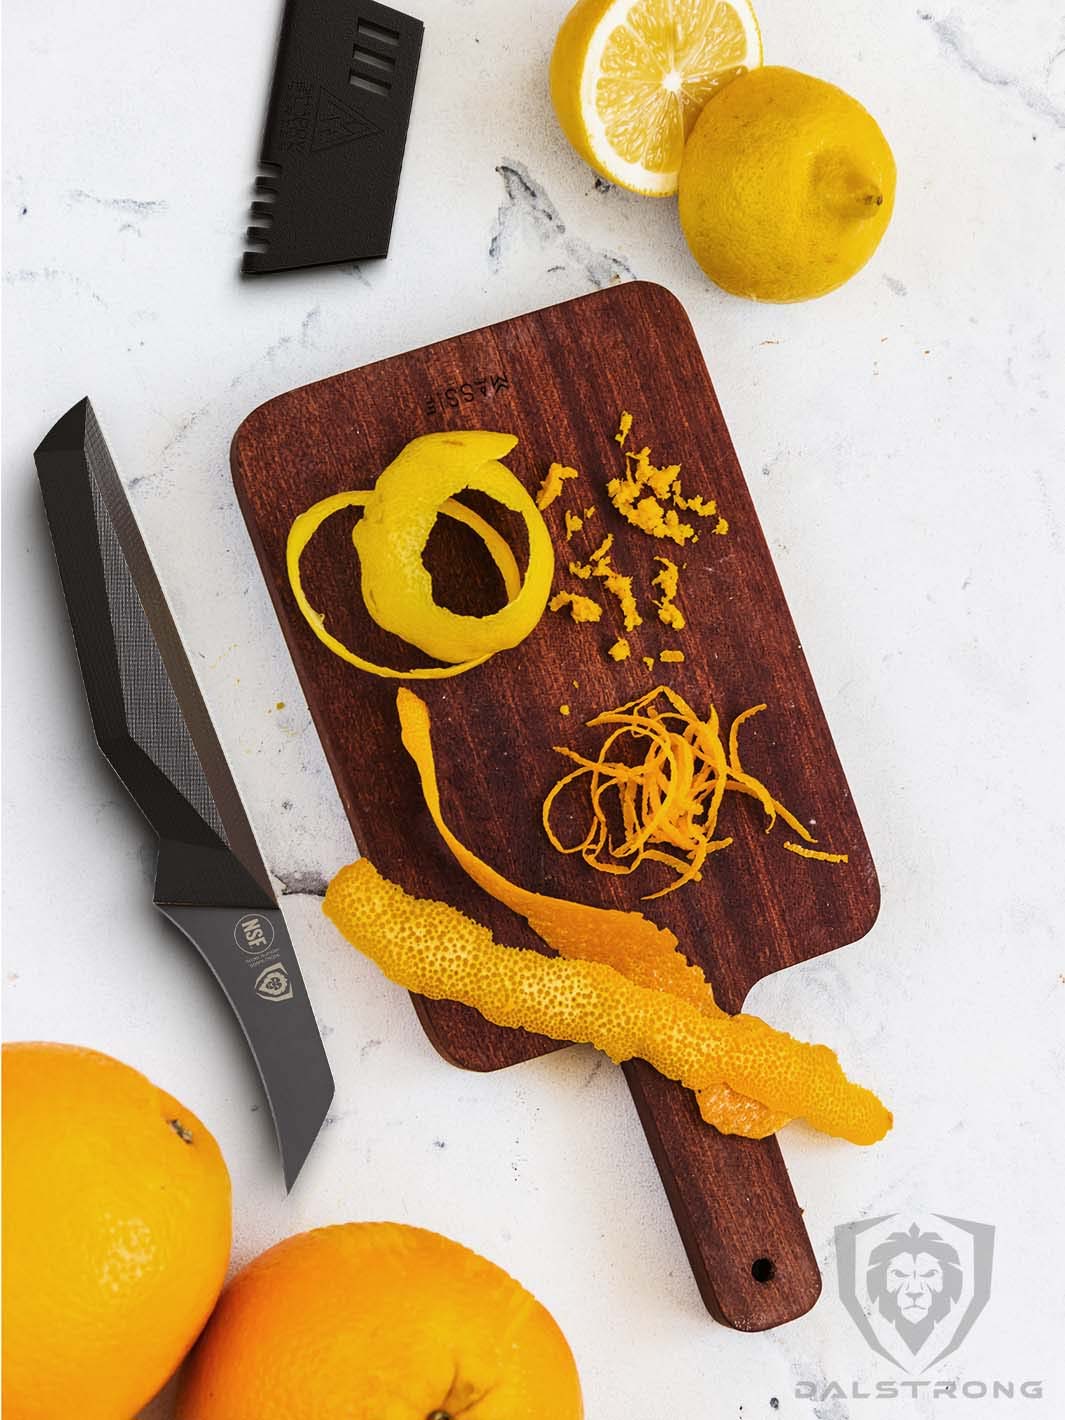 Dalstrong shadow black series 2.75 inch bird's beak paring knife with peeled orange on a wooden cutting board.